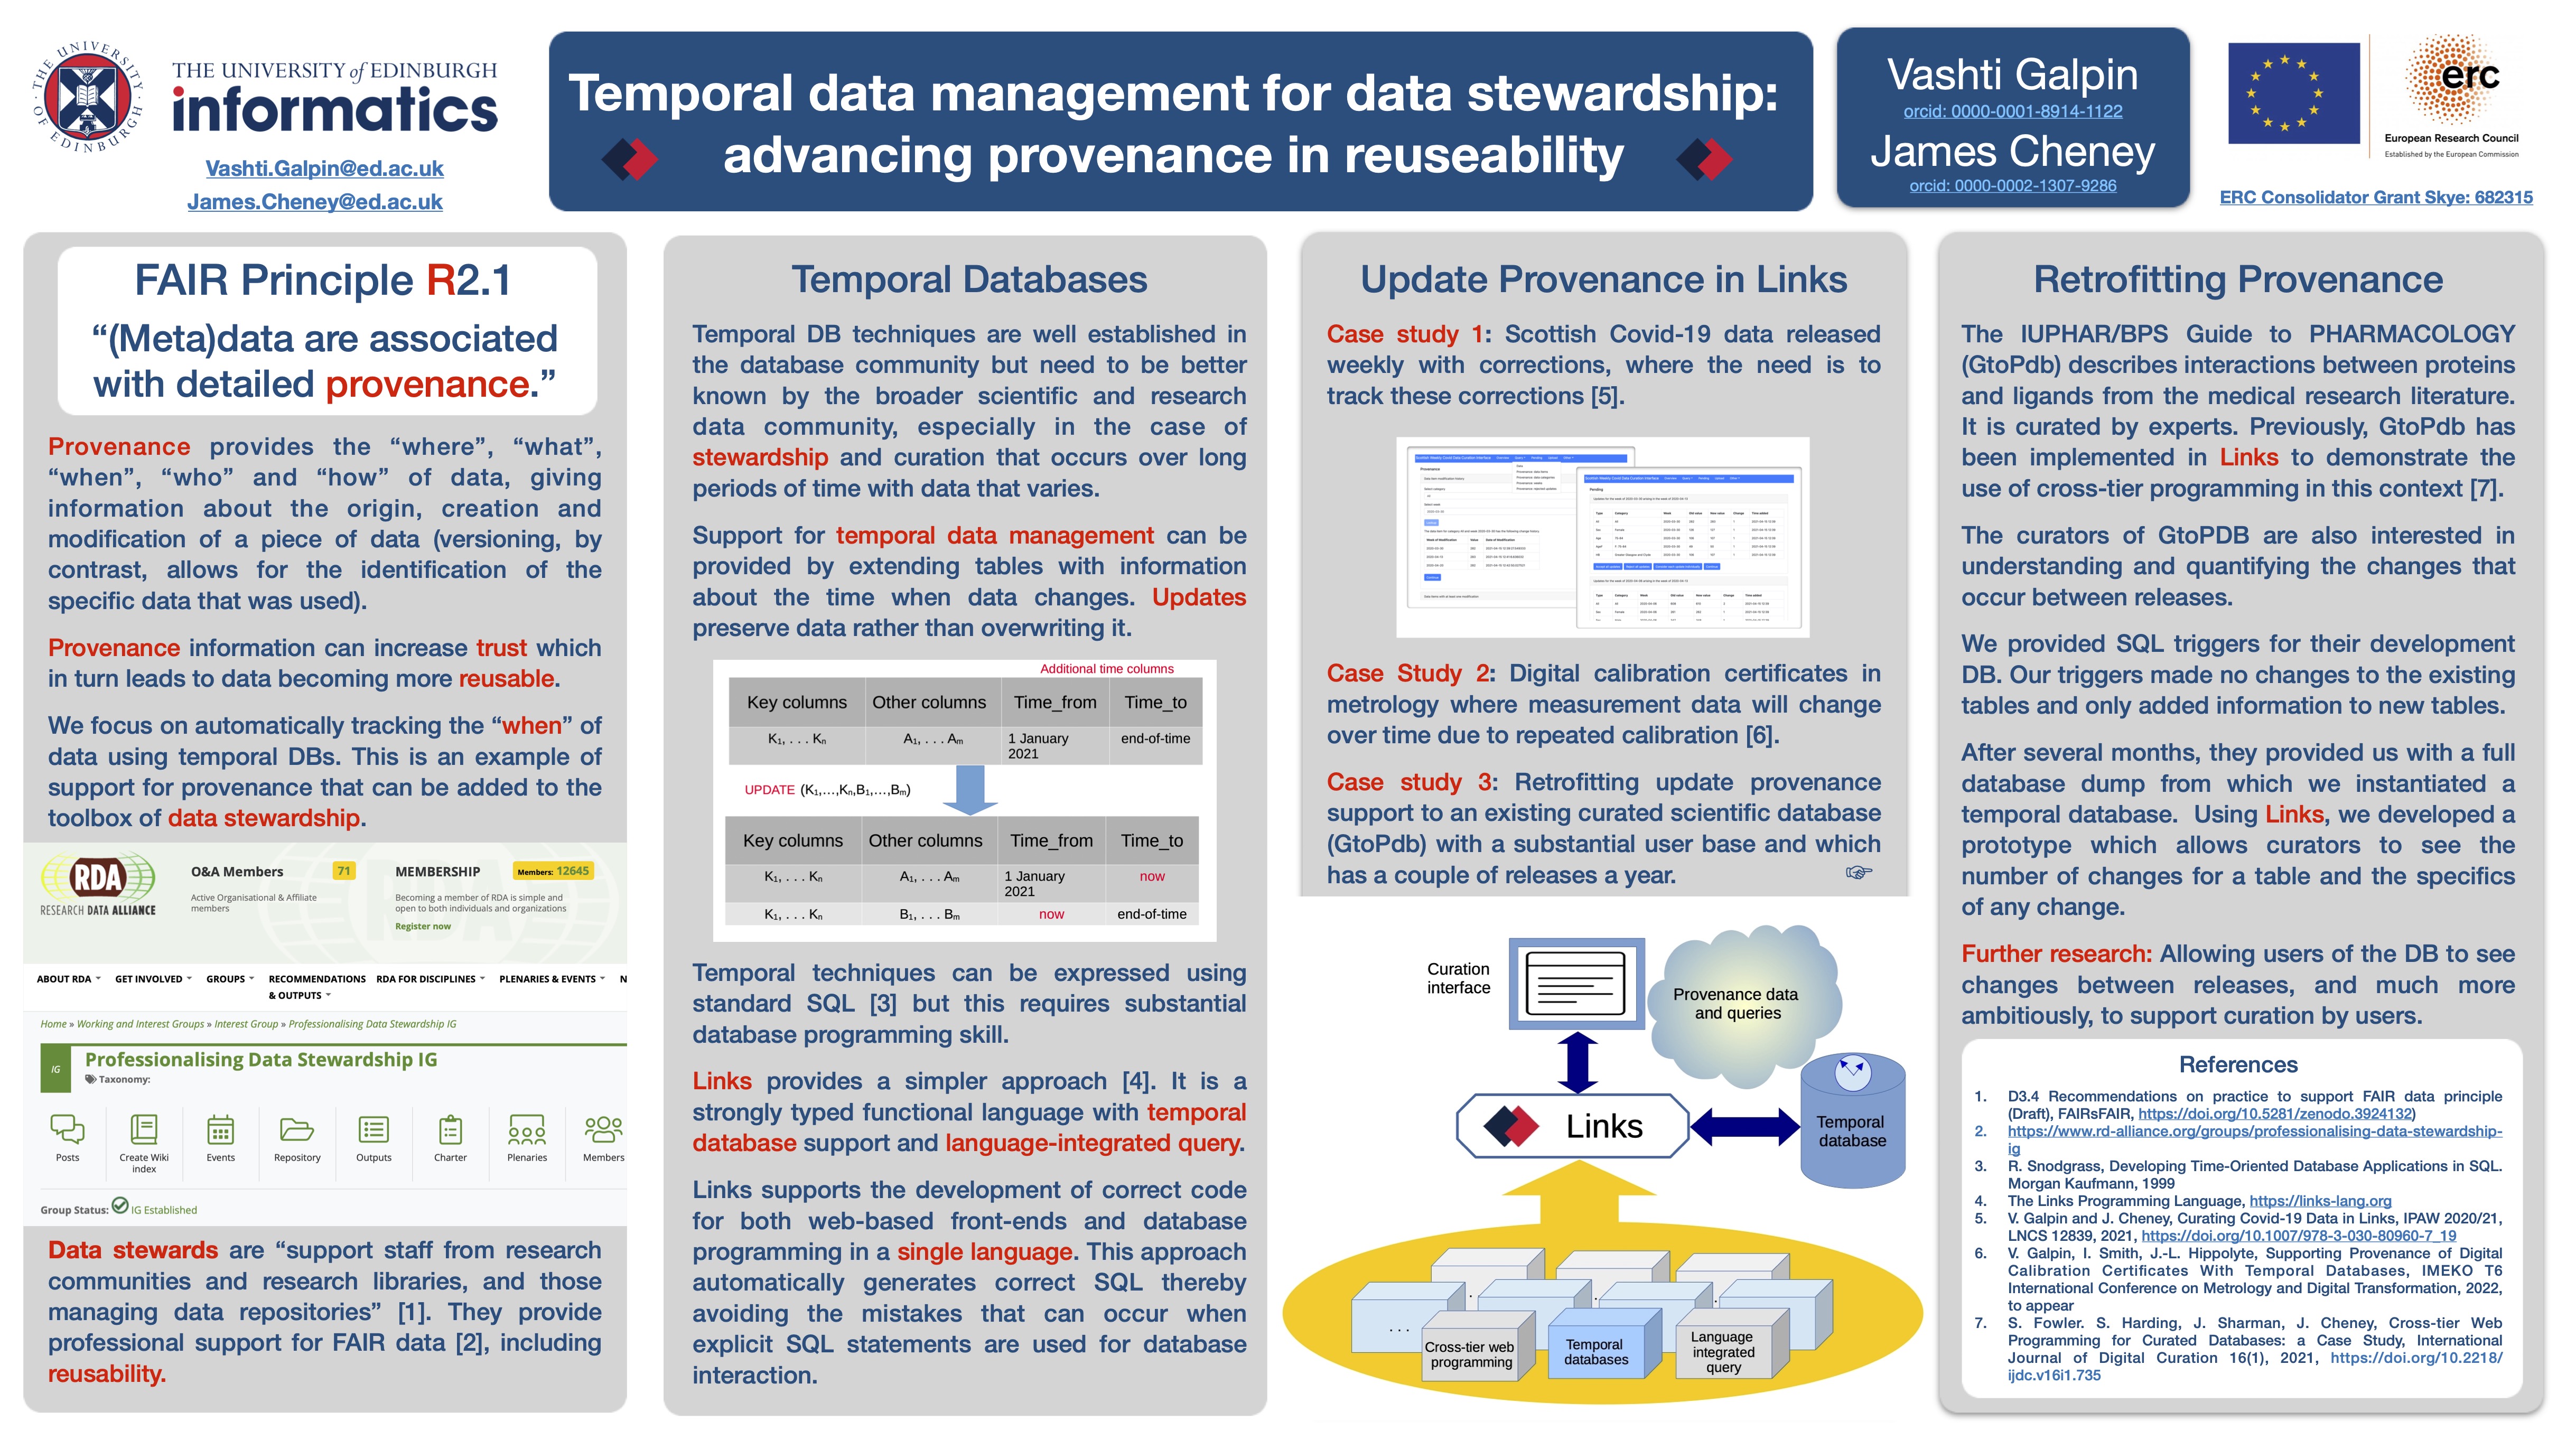 Poster with title 'Temporal data management for data stewardship: advancing provenance in reuseability'